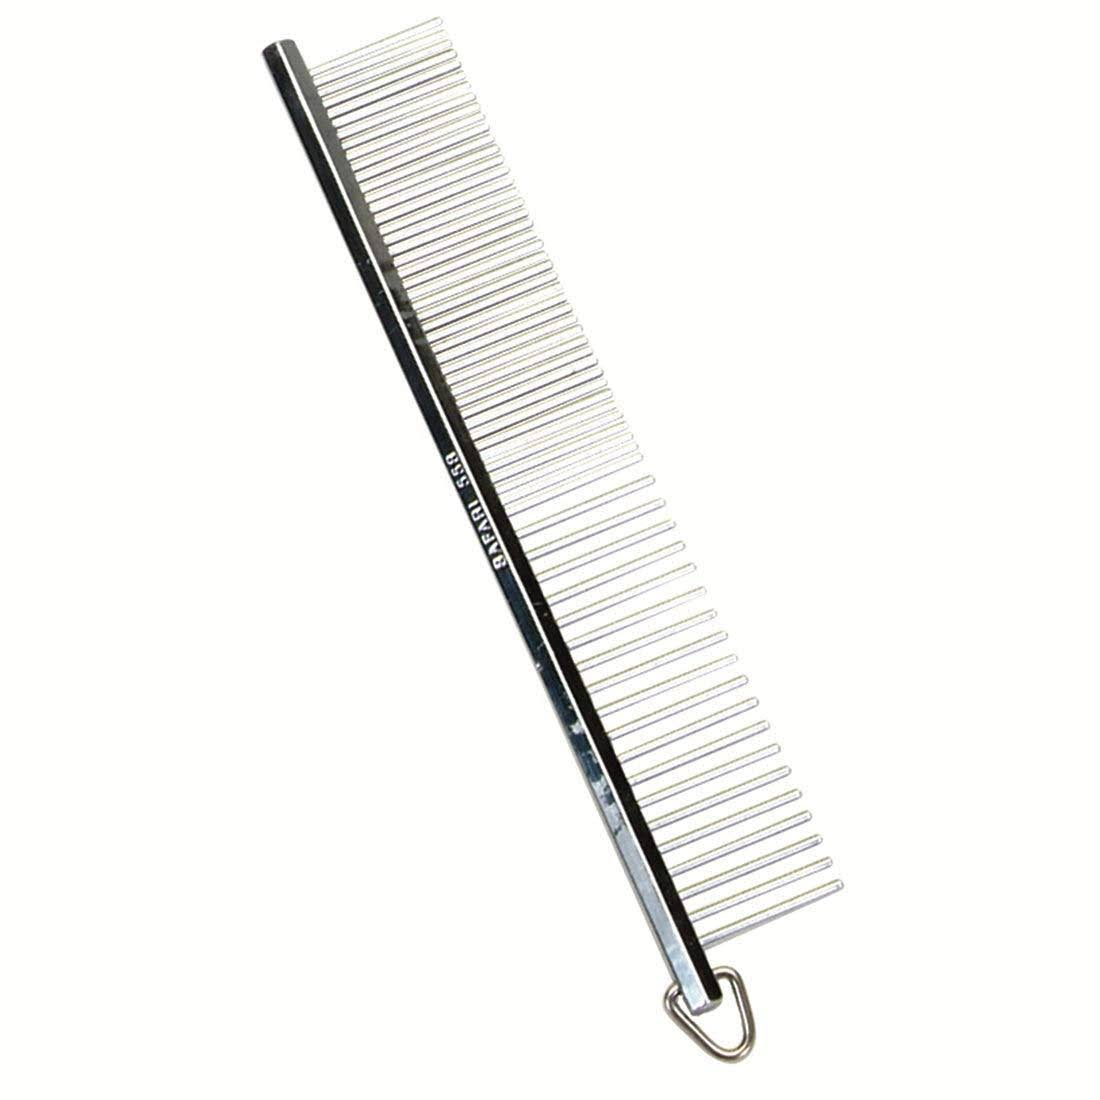 Safari Grooming Stainless Steel Comb for Dogs - 4.5" Long